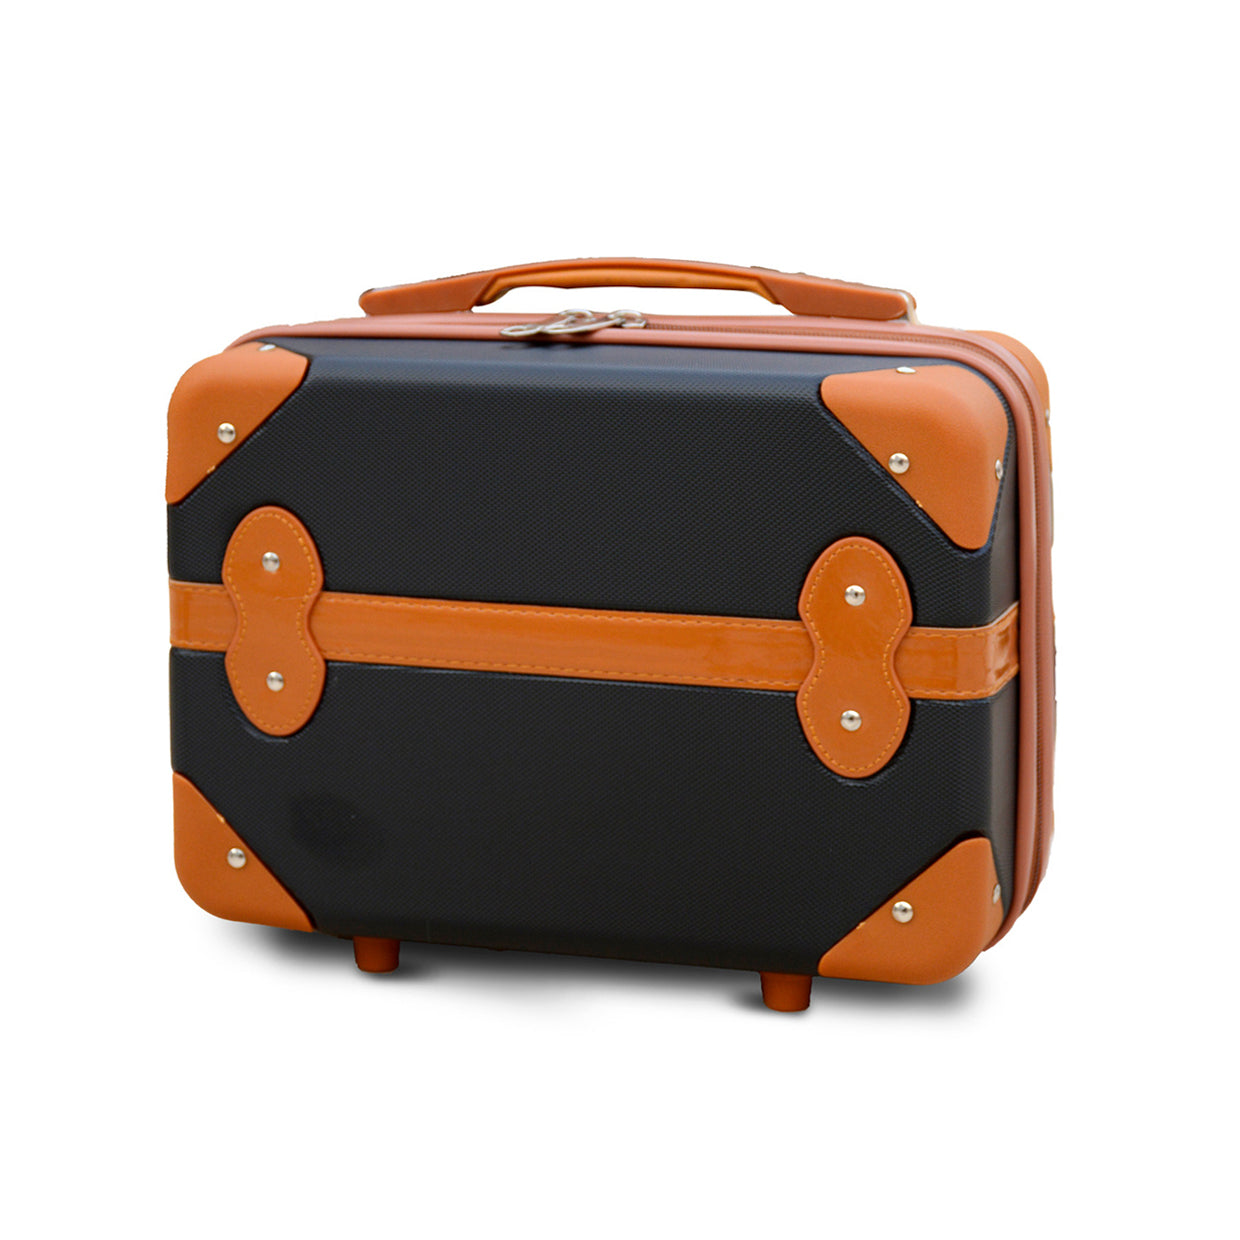 Lightweight ABS Beauty Case | Corner Guard Black and Brown Zaappy